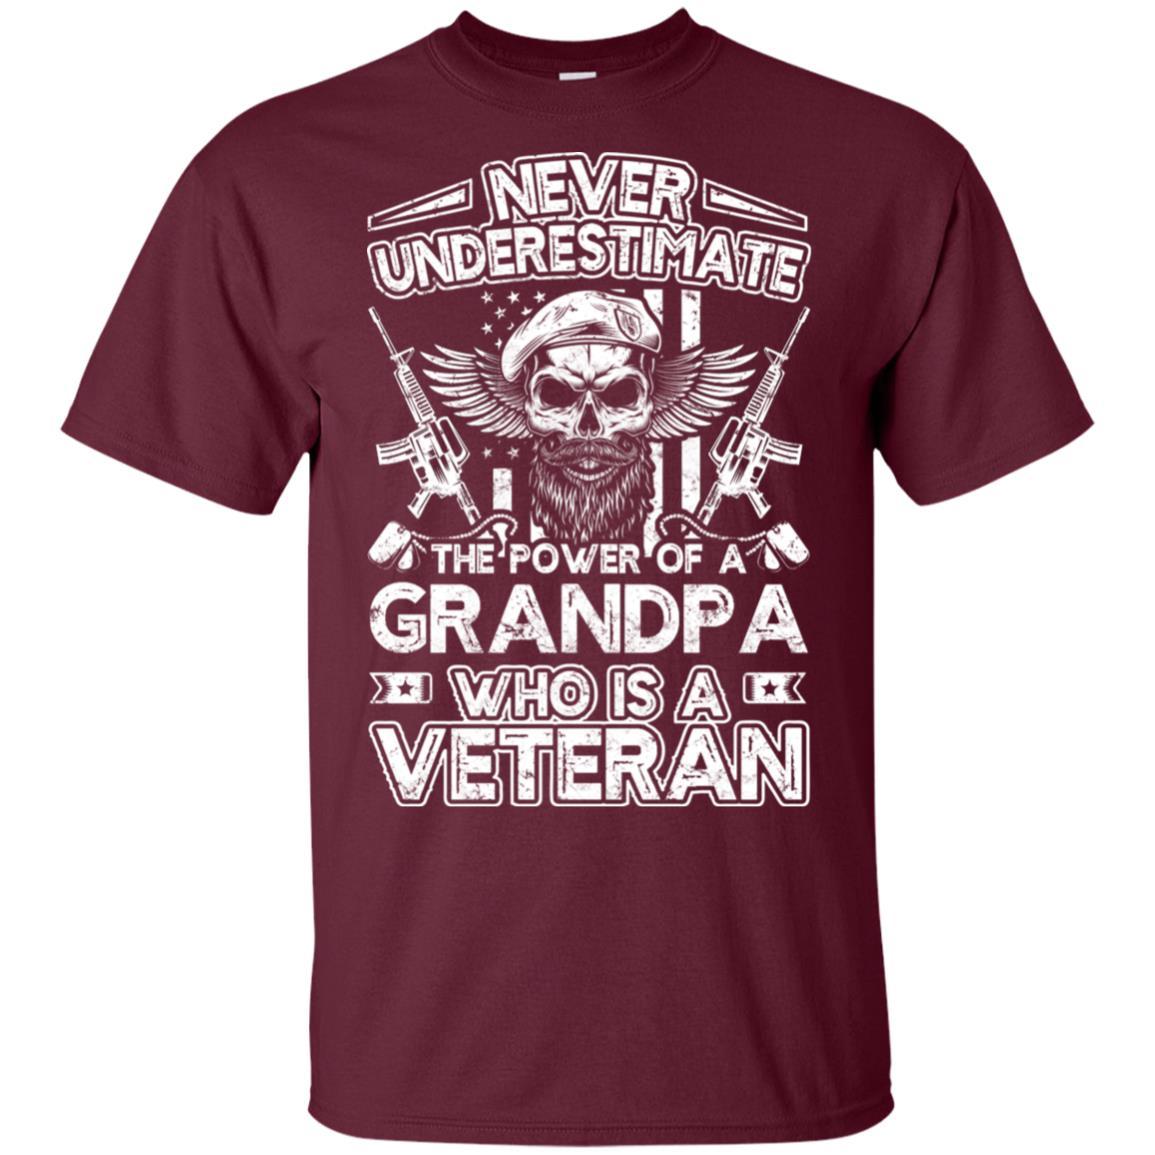 Military T-Shirt "Never Underestimate The Power Of A Grandpa Who Is A Veteran On" Front-TShirt-General-Veterans Nation